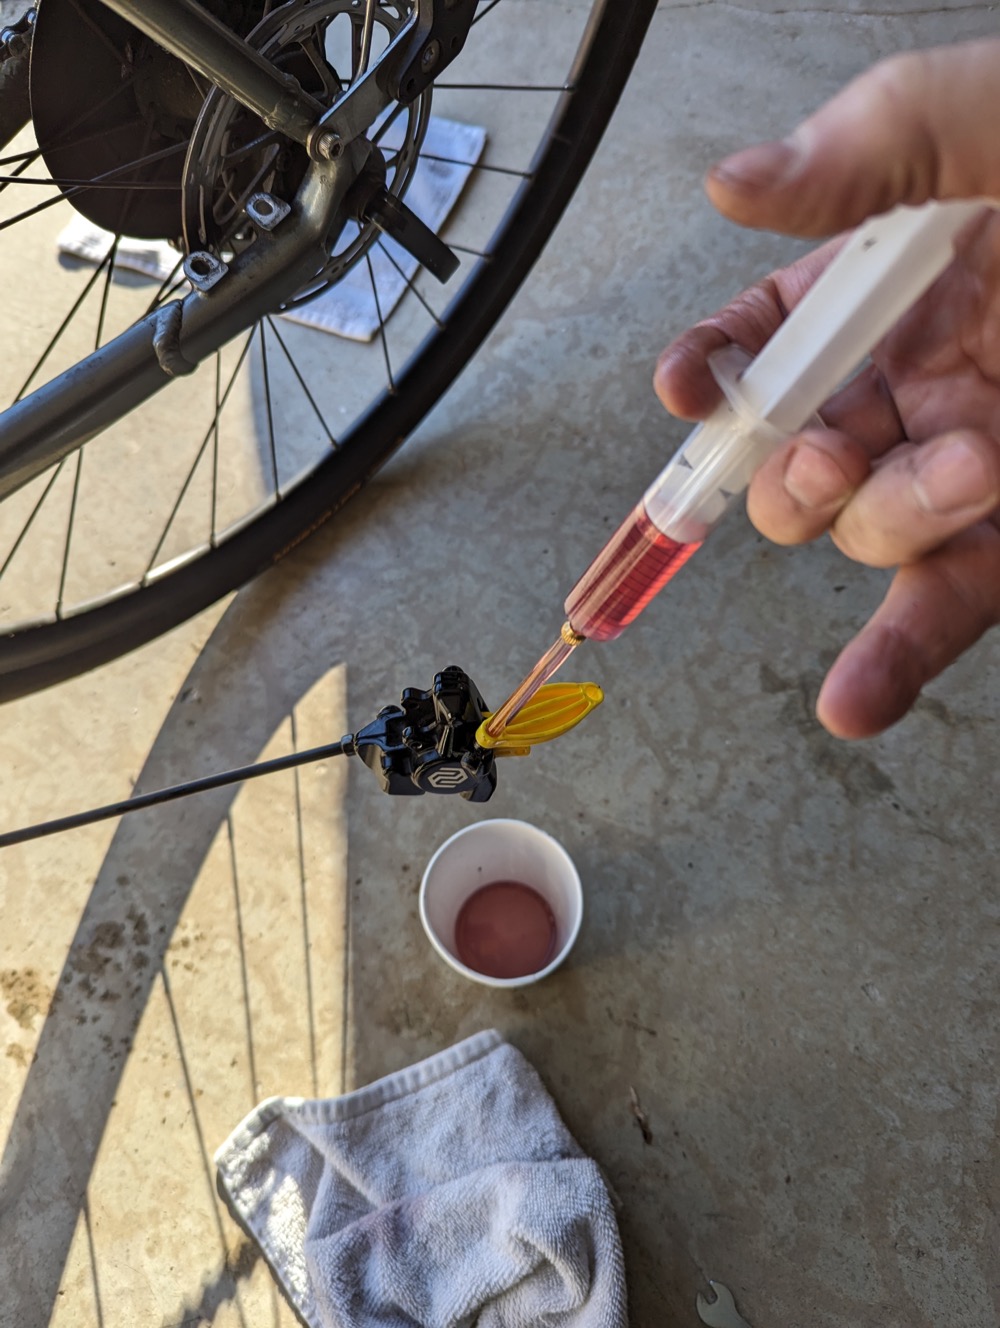 Using the correct syringe technique to bleed my brakes